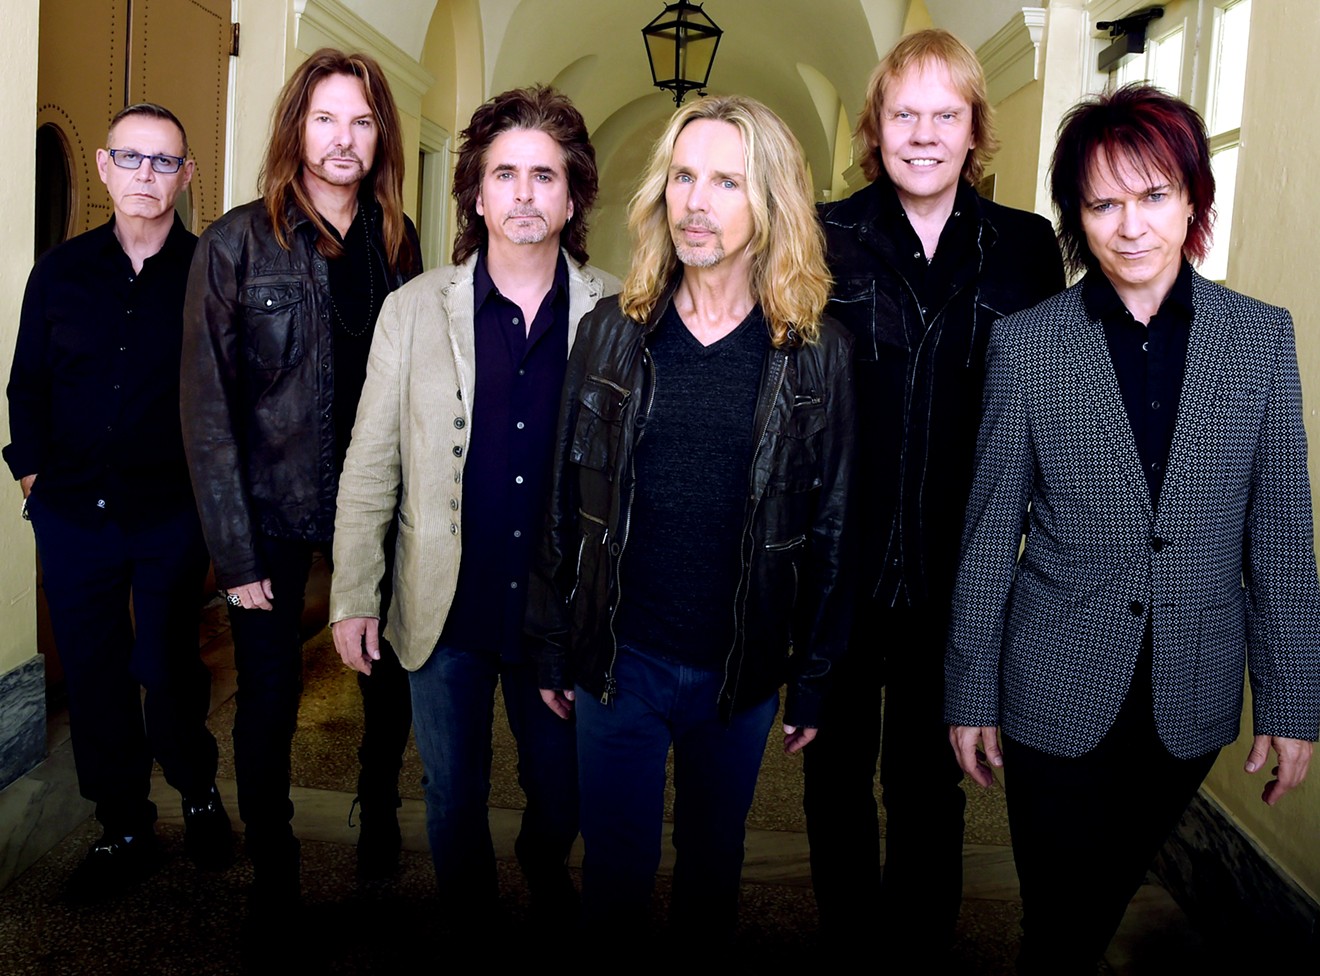 Styx today: Chuck Panozzo, Ricky Phillips, Todd Sucherman, Tommy Shaw, James "JY" Young, Lawrence Gowan